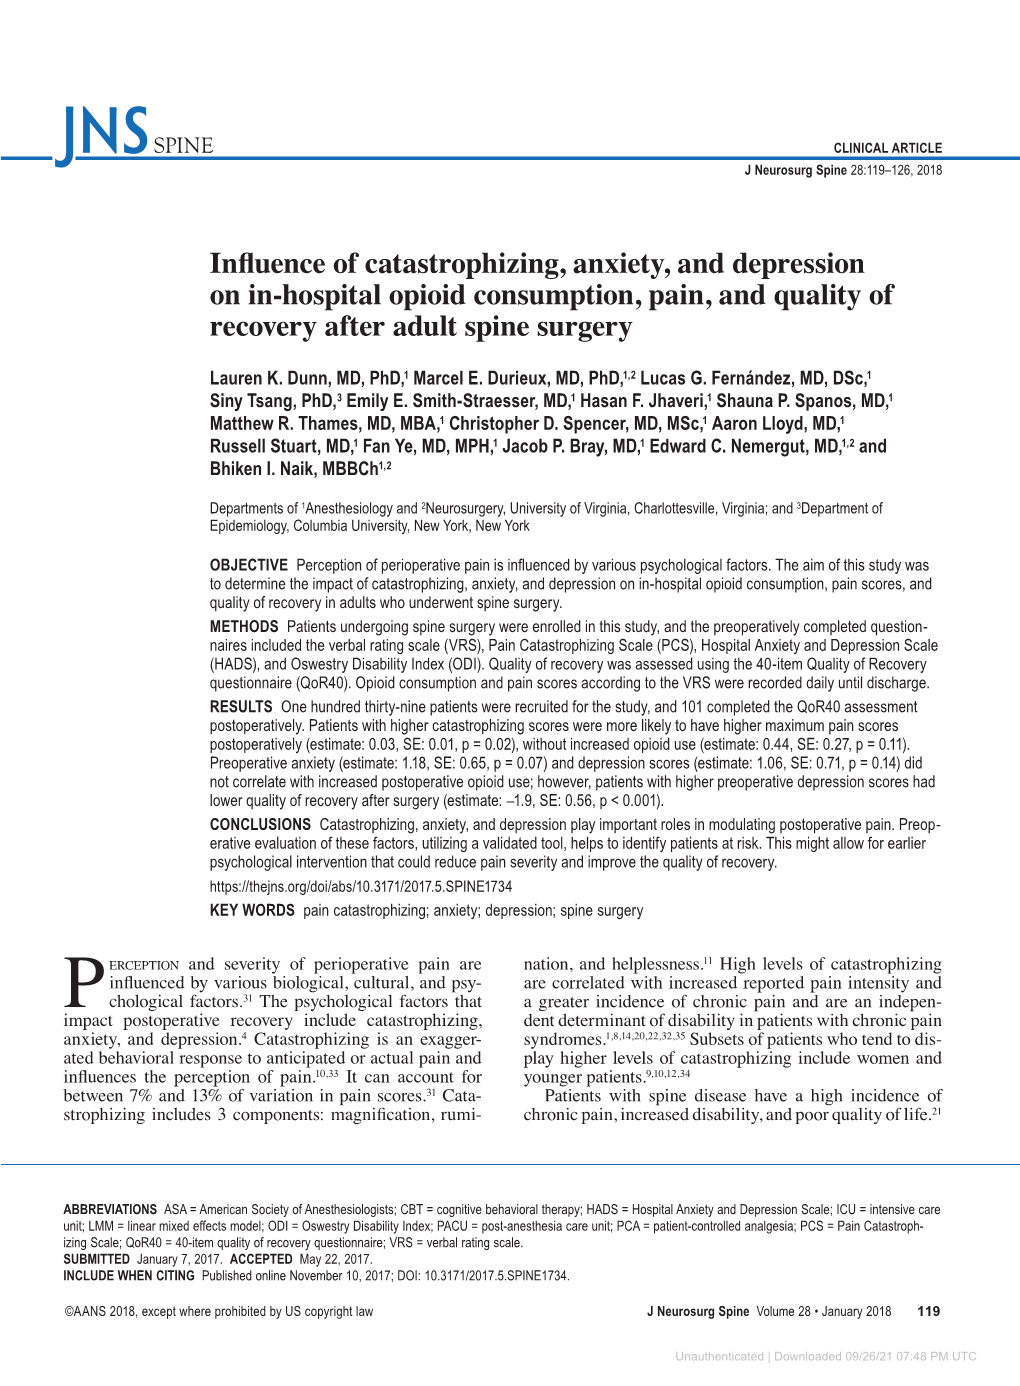 Influence of Catastrophizing, Anxiety, and Depression on In-Hospital Opioid Consumption, Pain, and Quality of Recovery After Adult Spine Surgery